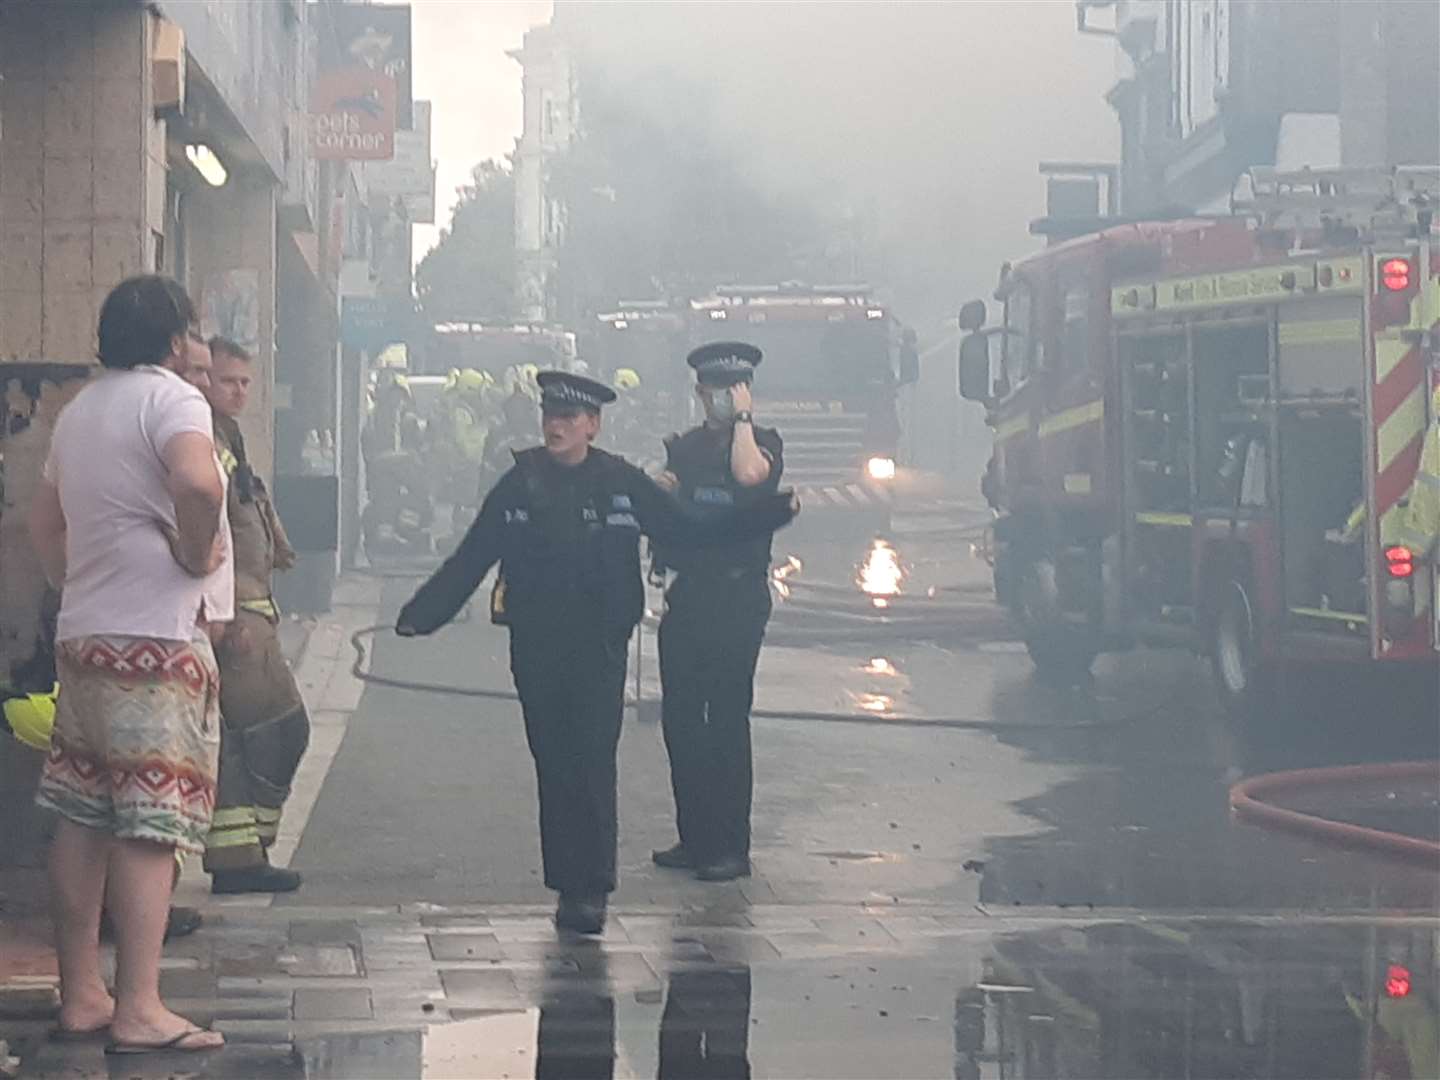 A distraught Ciaran O'Quigley watched on from the street as firefighters tried to rescue his business